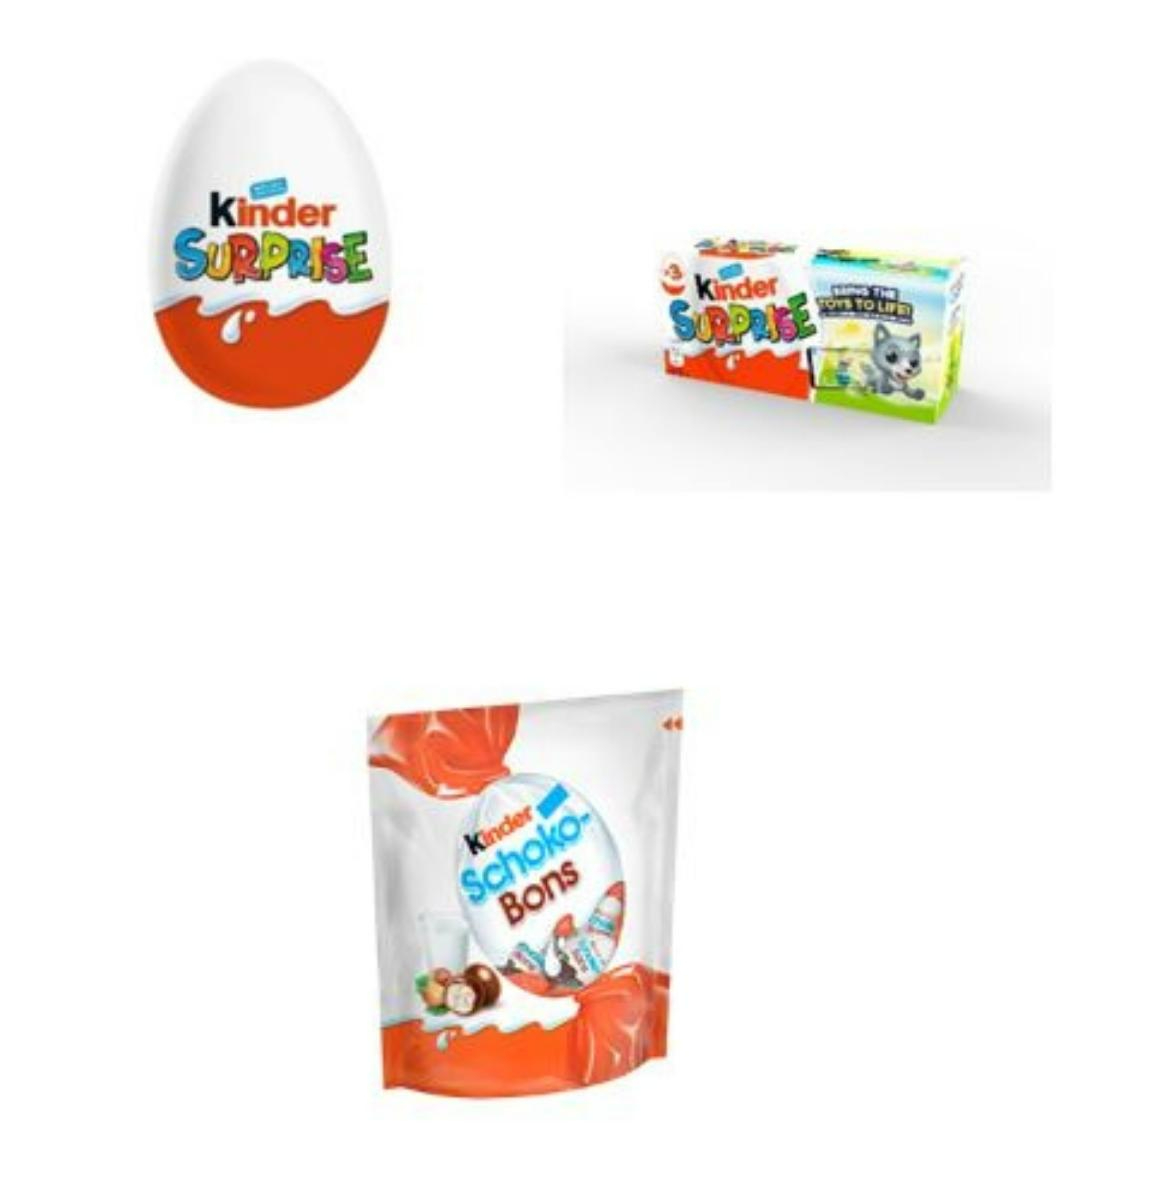 Kinder products included in FSAI recall. Image: FSAI